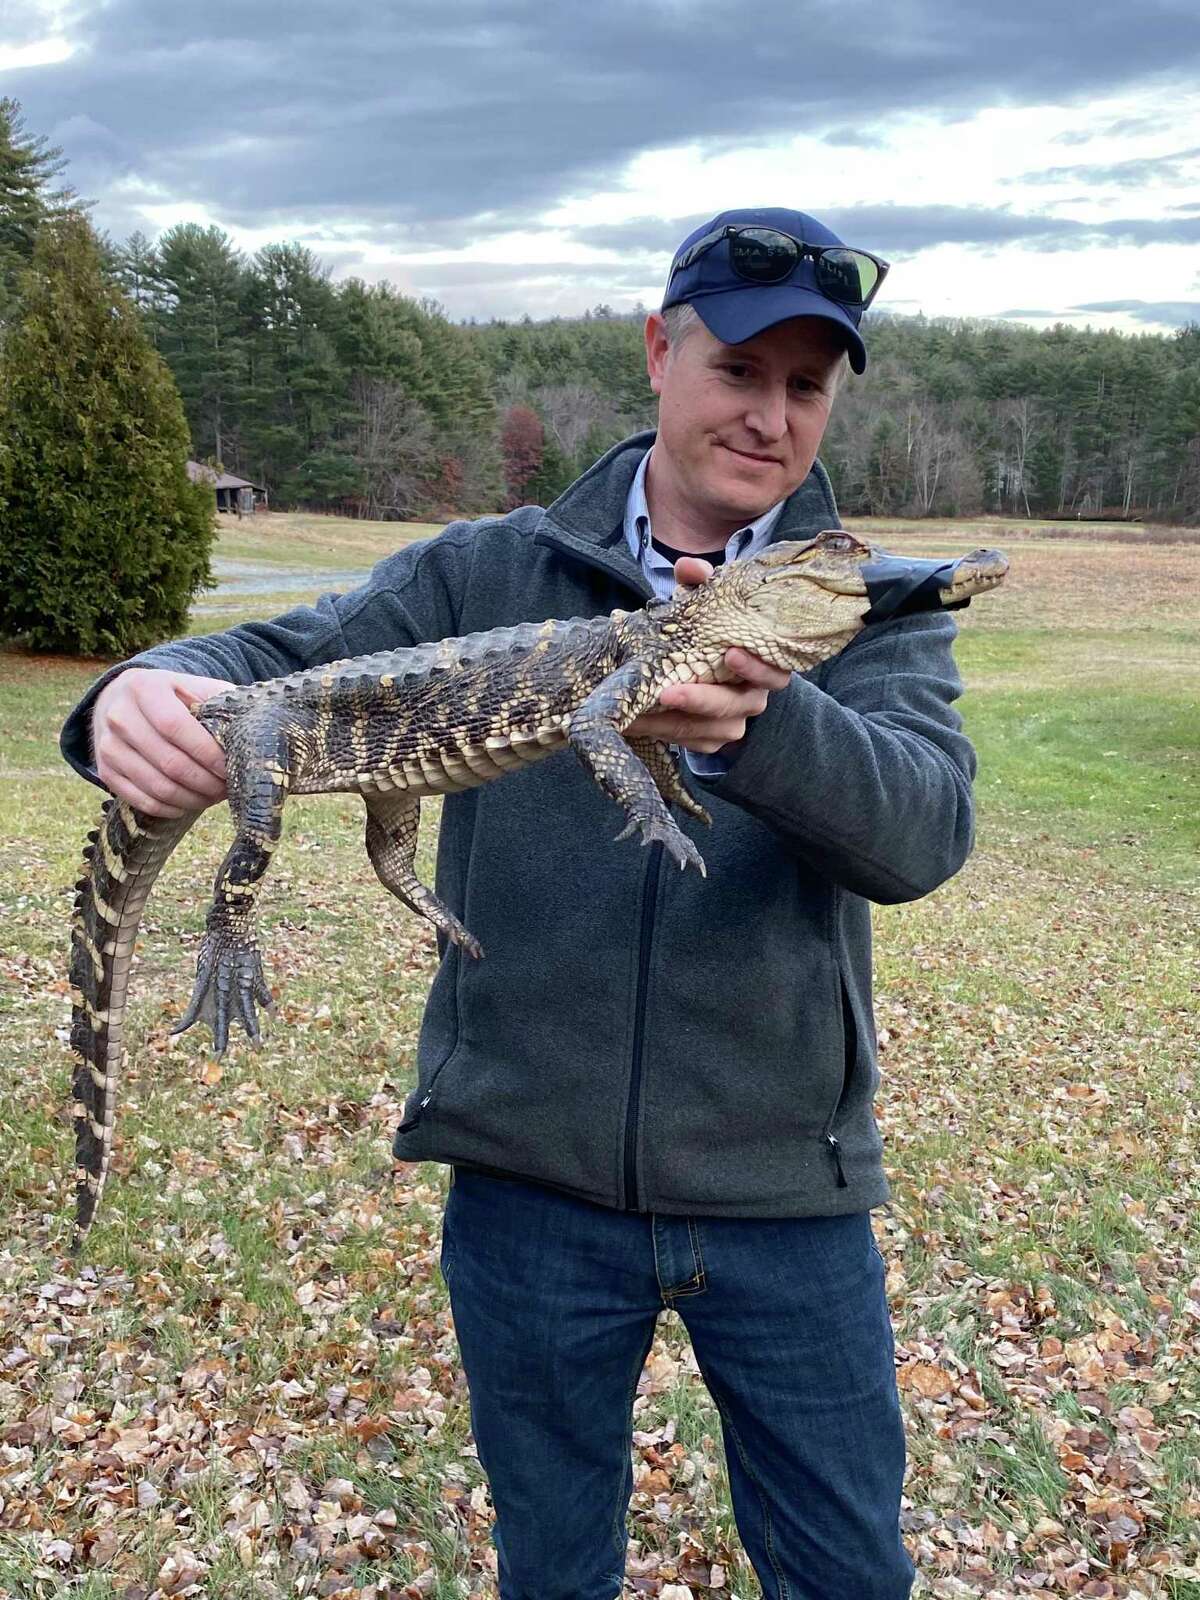 Joe Rogers, the Connecticut Valley District Supervisor for MassWildlife, holds an alligator that was caught by a persistent kayaker near the Westfield River Tuesday. The tape on the alligator’s muzzle is too prevent bites while being handled, MassWildlife said.